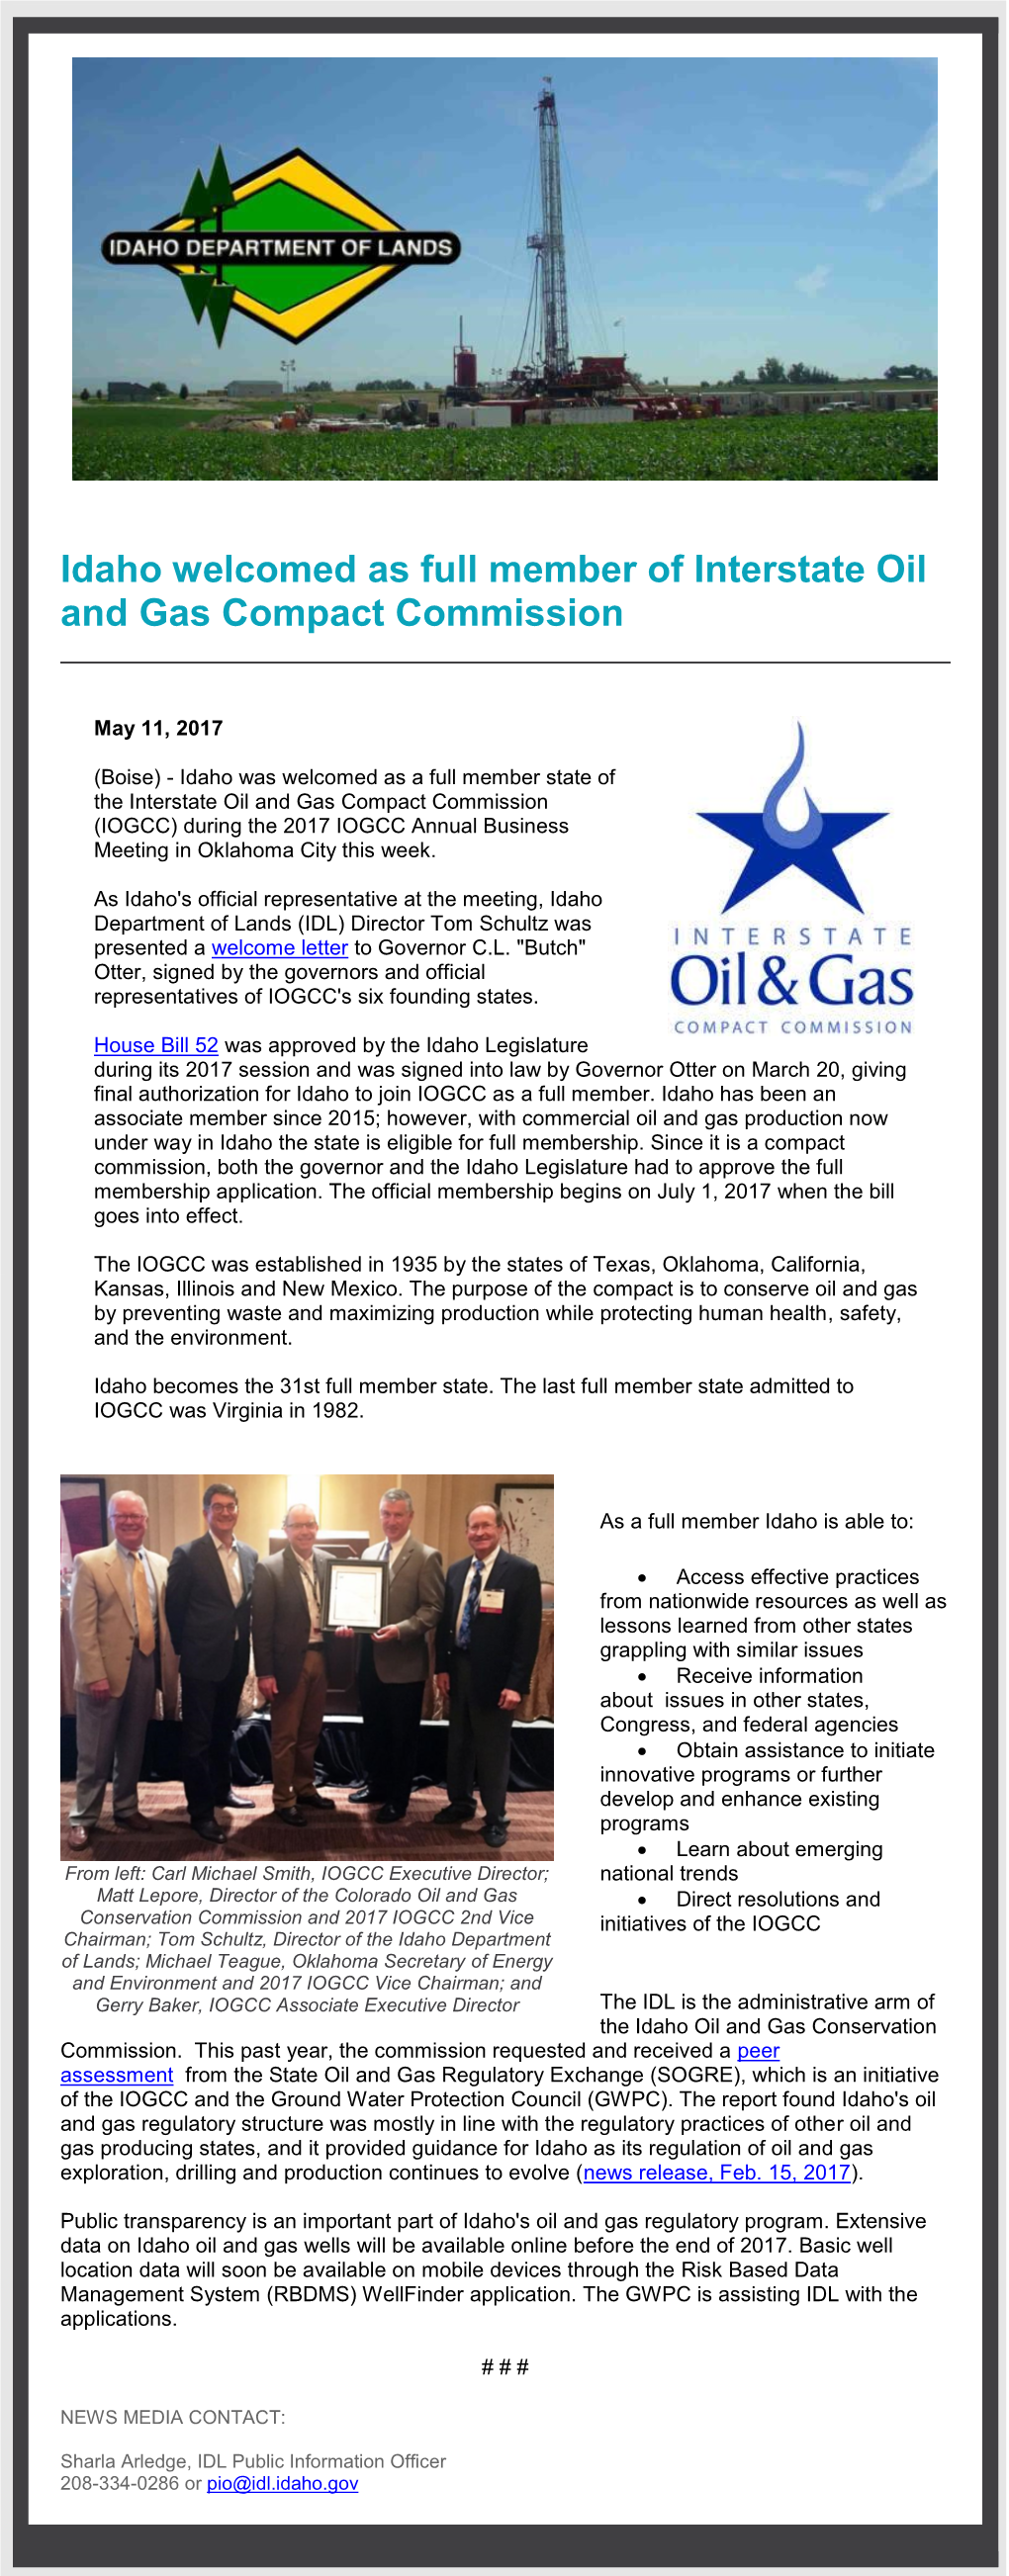 Idaho Welcomed As Full Member of Interstate Oil and Gas Compact Commission